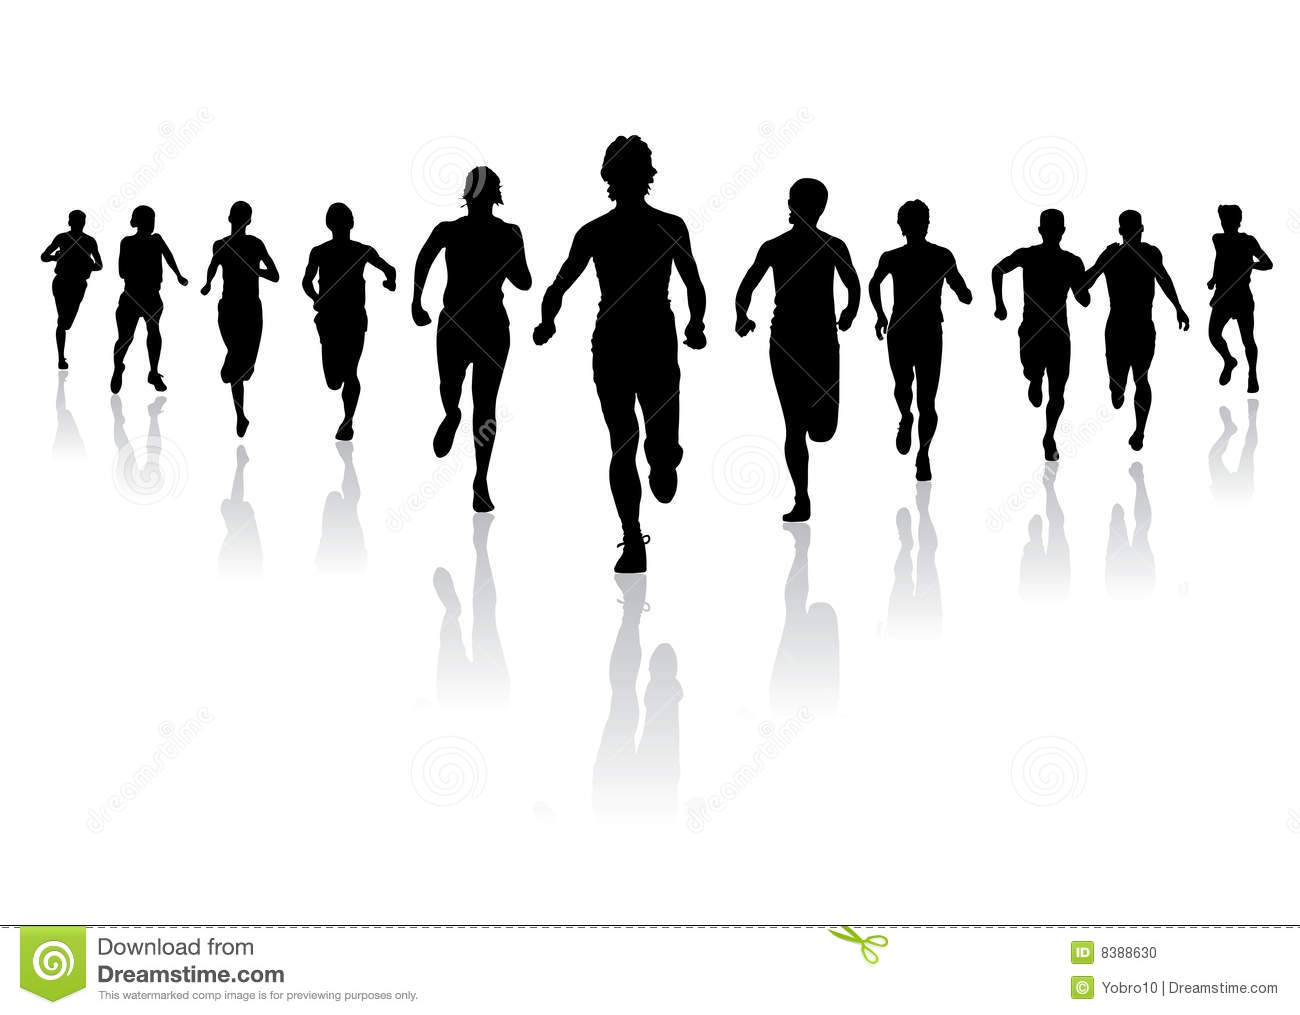 Group Running Clipart Displaying 19 Images For Group Running Clipart